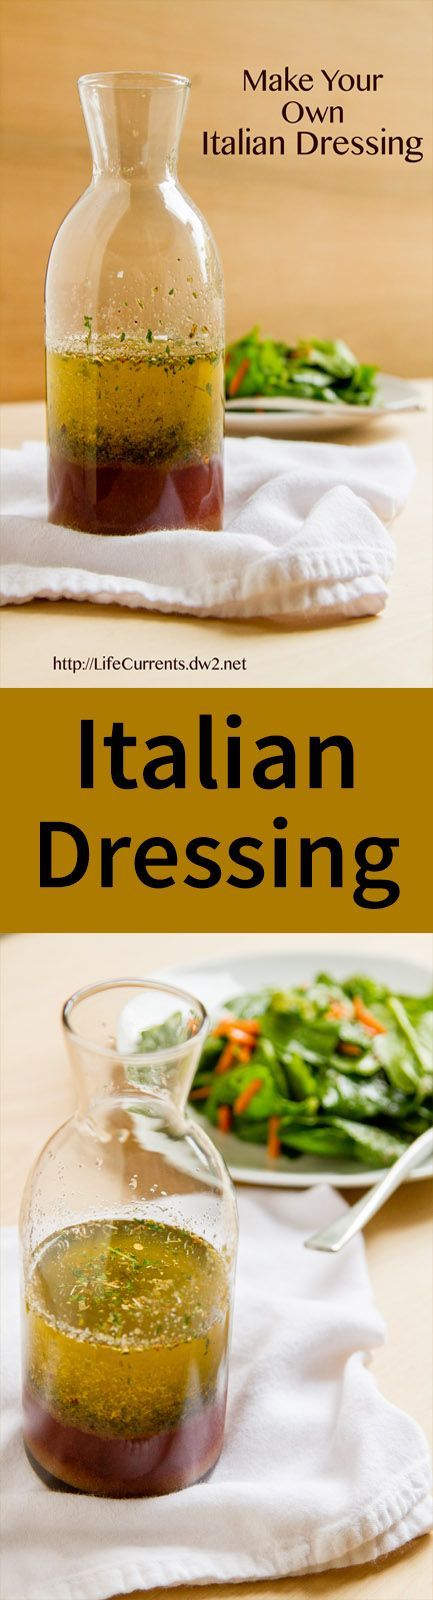 Make your own Italian Dressing! by Life Currents